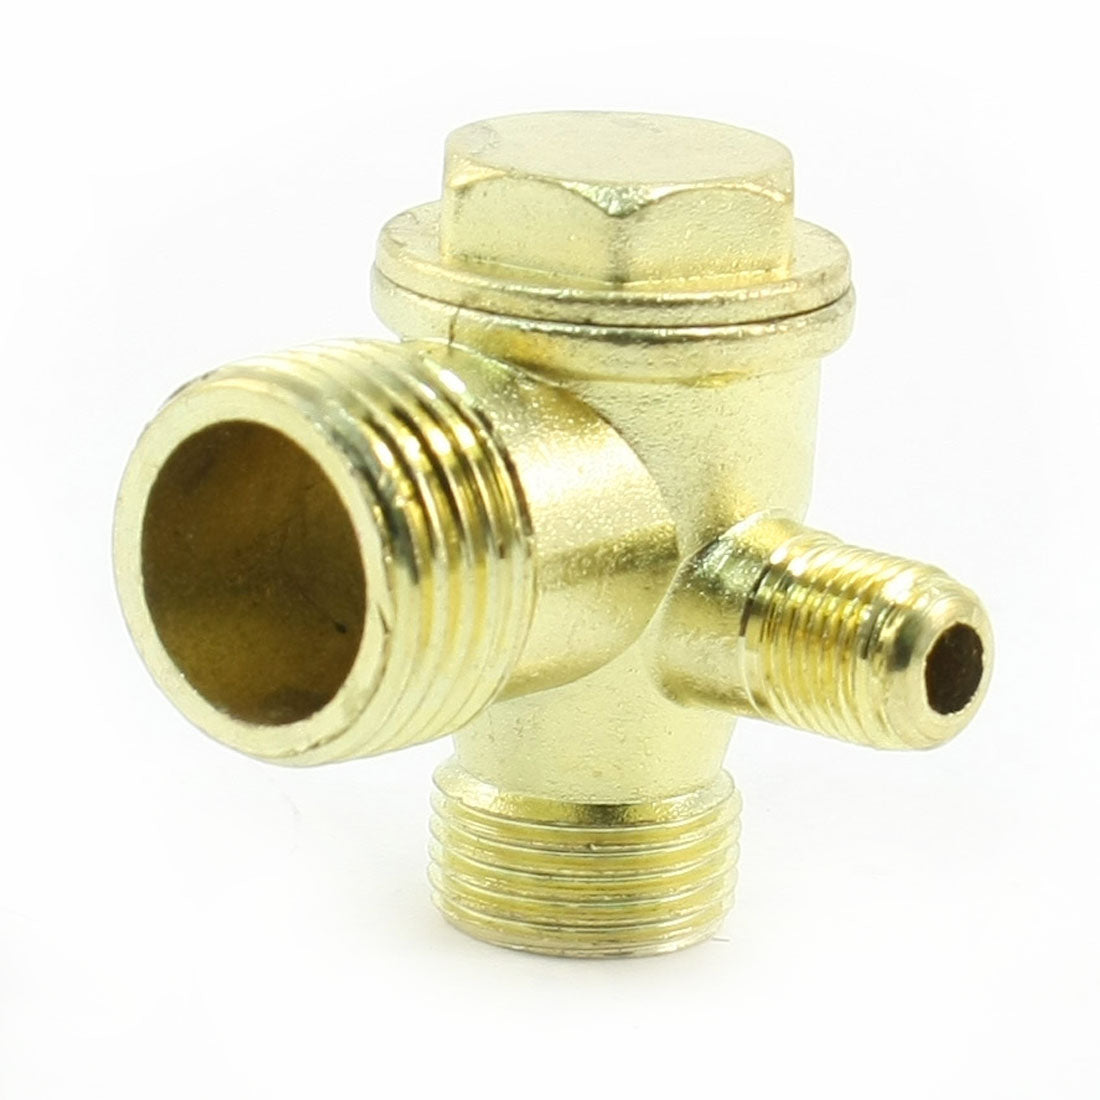 uxcell Uxcell Copper Tone 3-way Air Compressor Fittings Threaded Check Valve